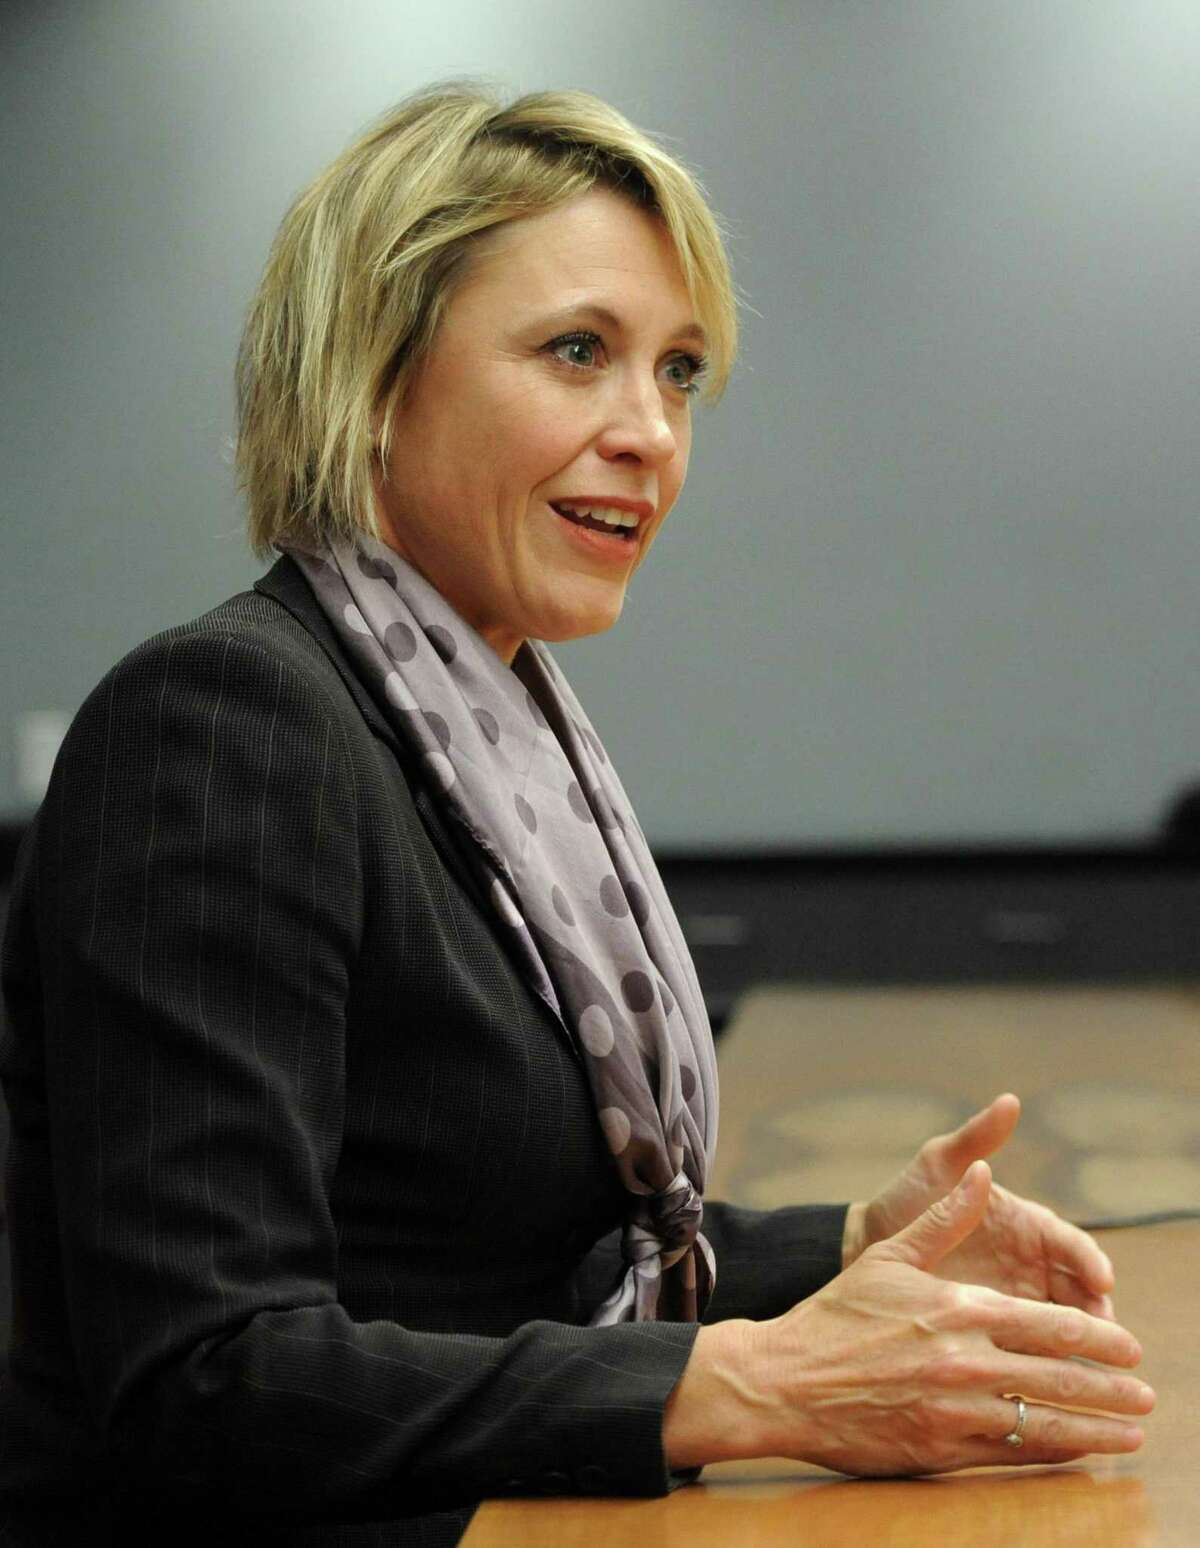 Sue Hatfield is the current chair of the Connecticut Republican Party. In 2018, she was the Republican candidate for Attorney General of Connecticut.